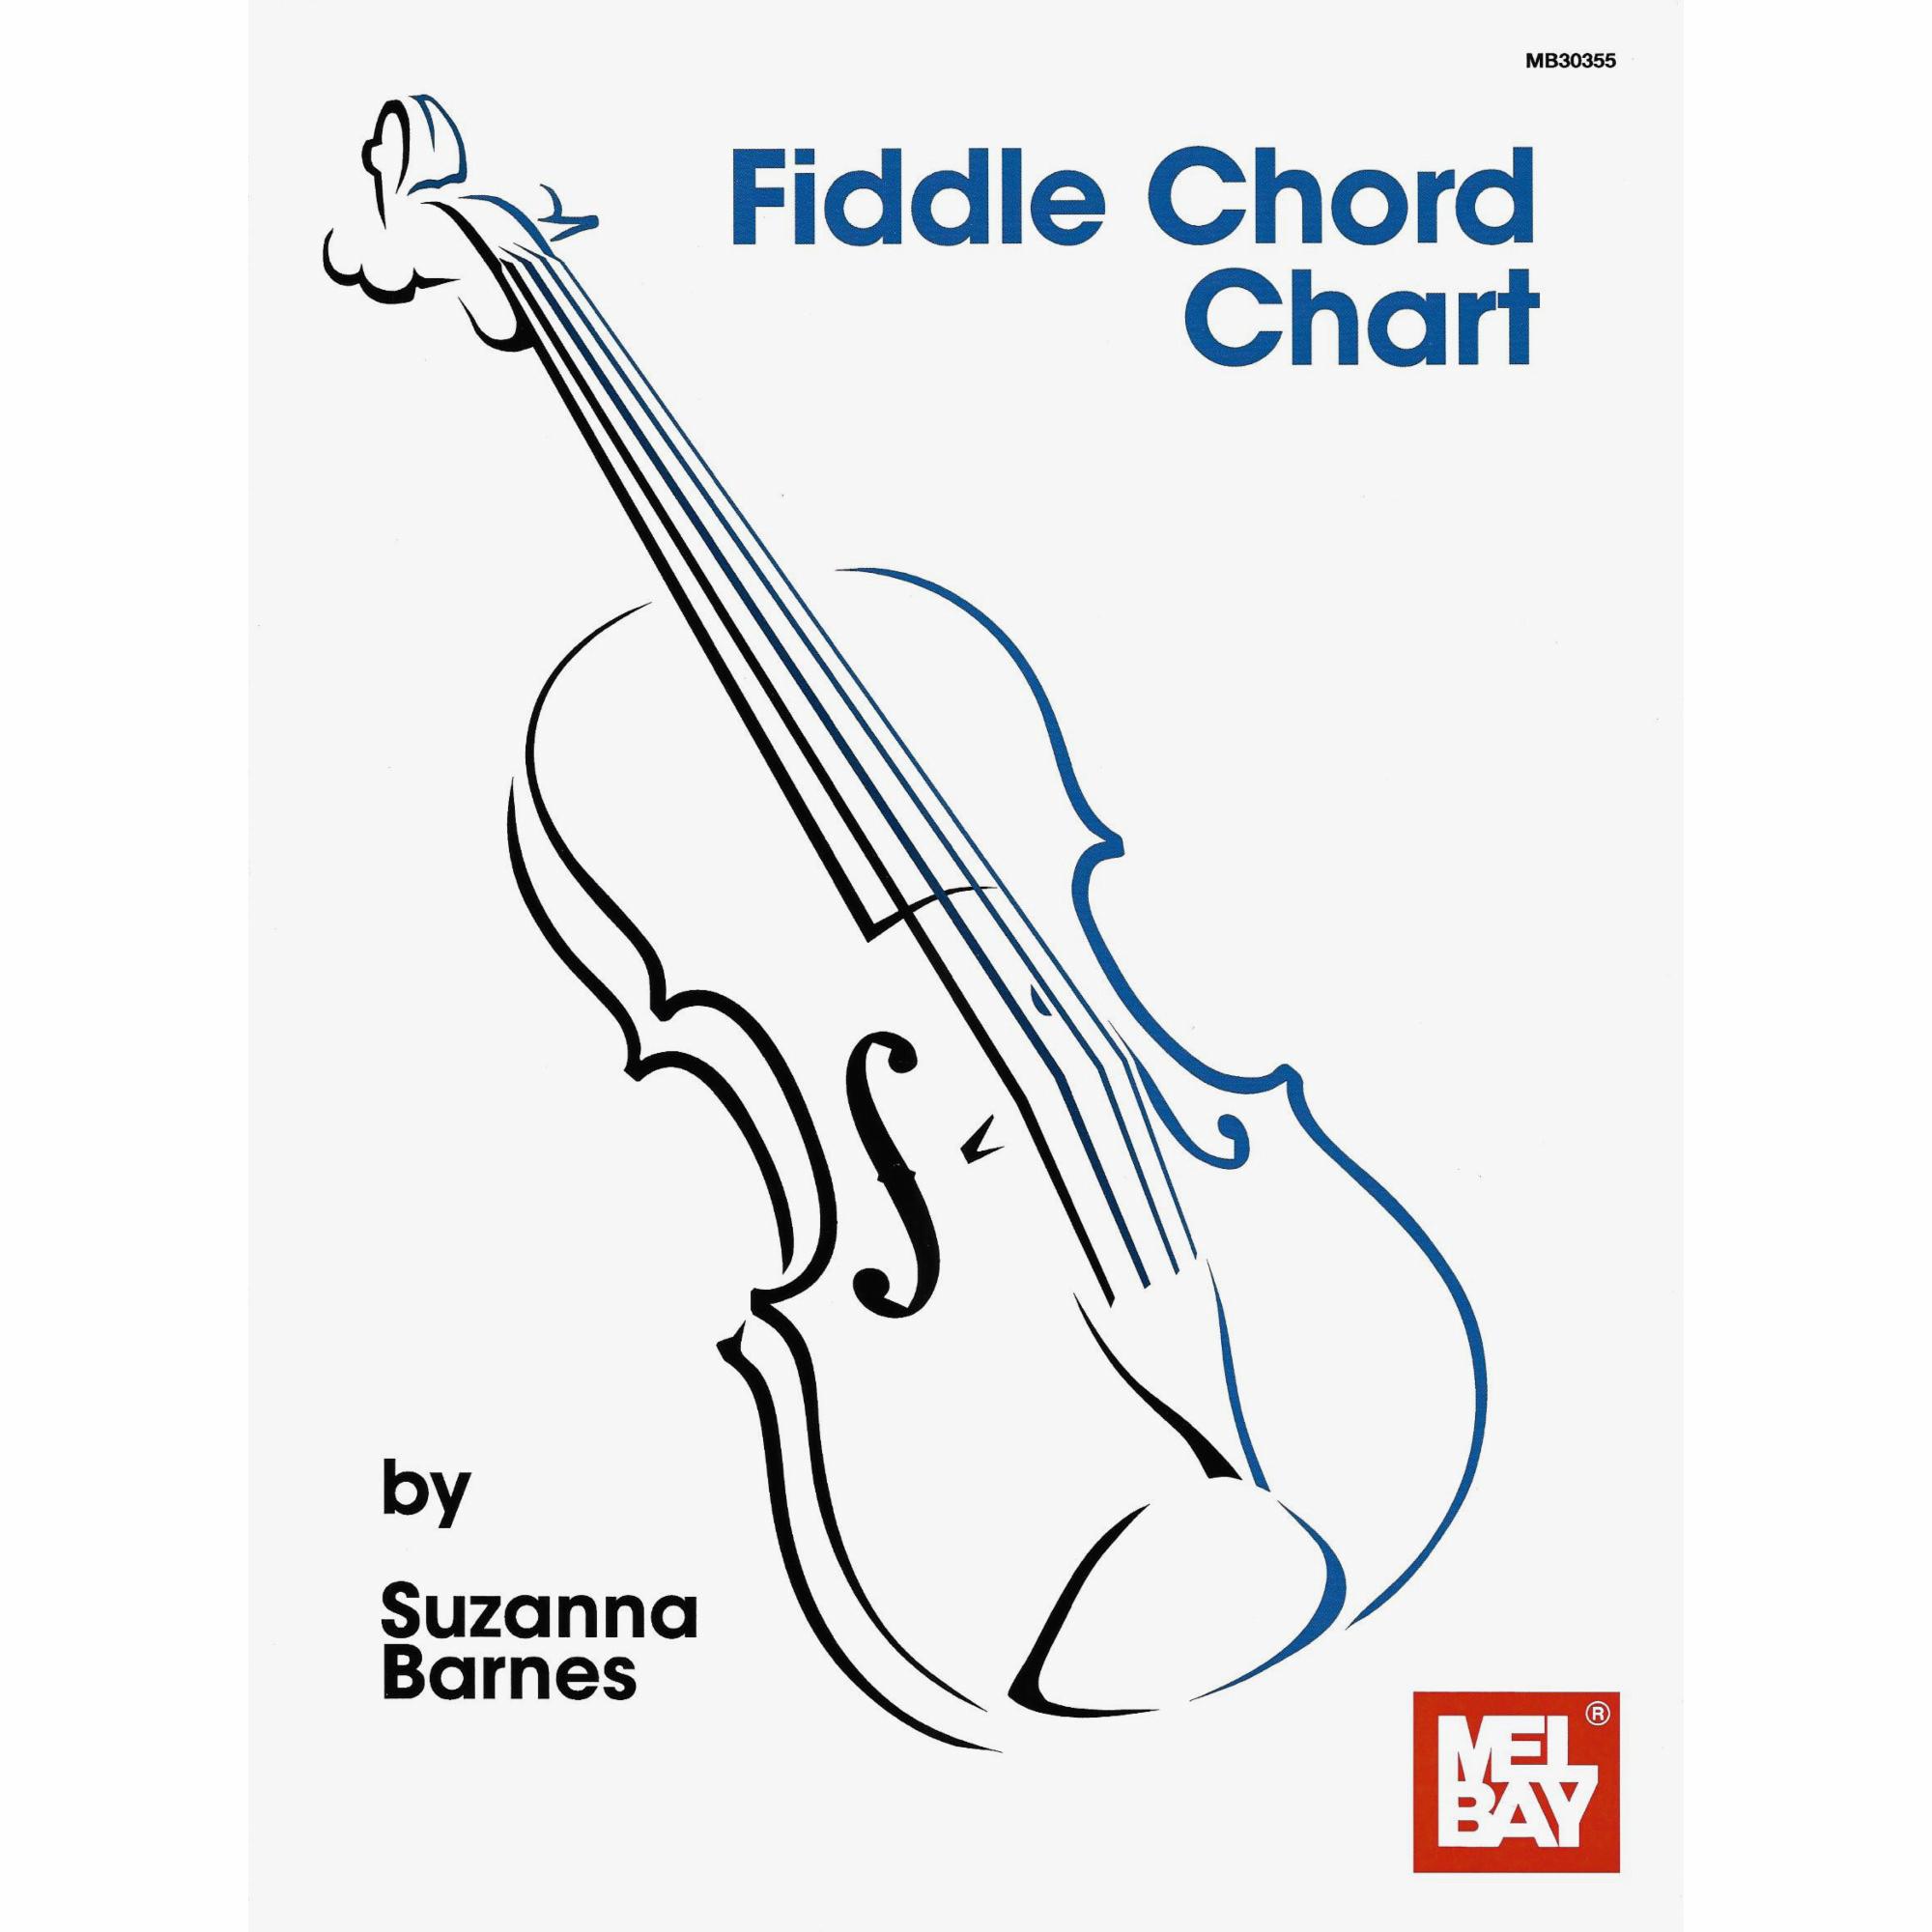 Fiddle Chord Chart